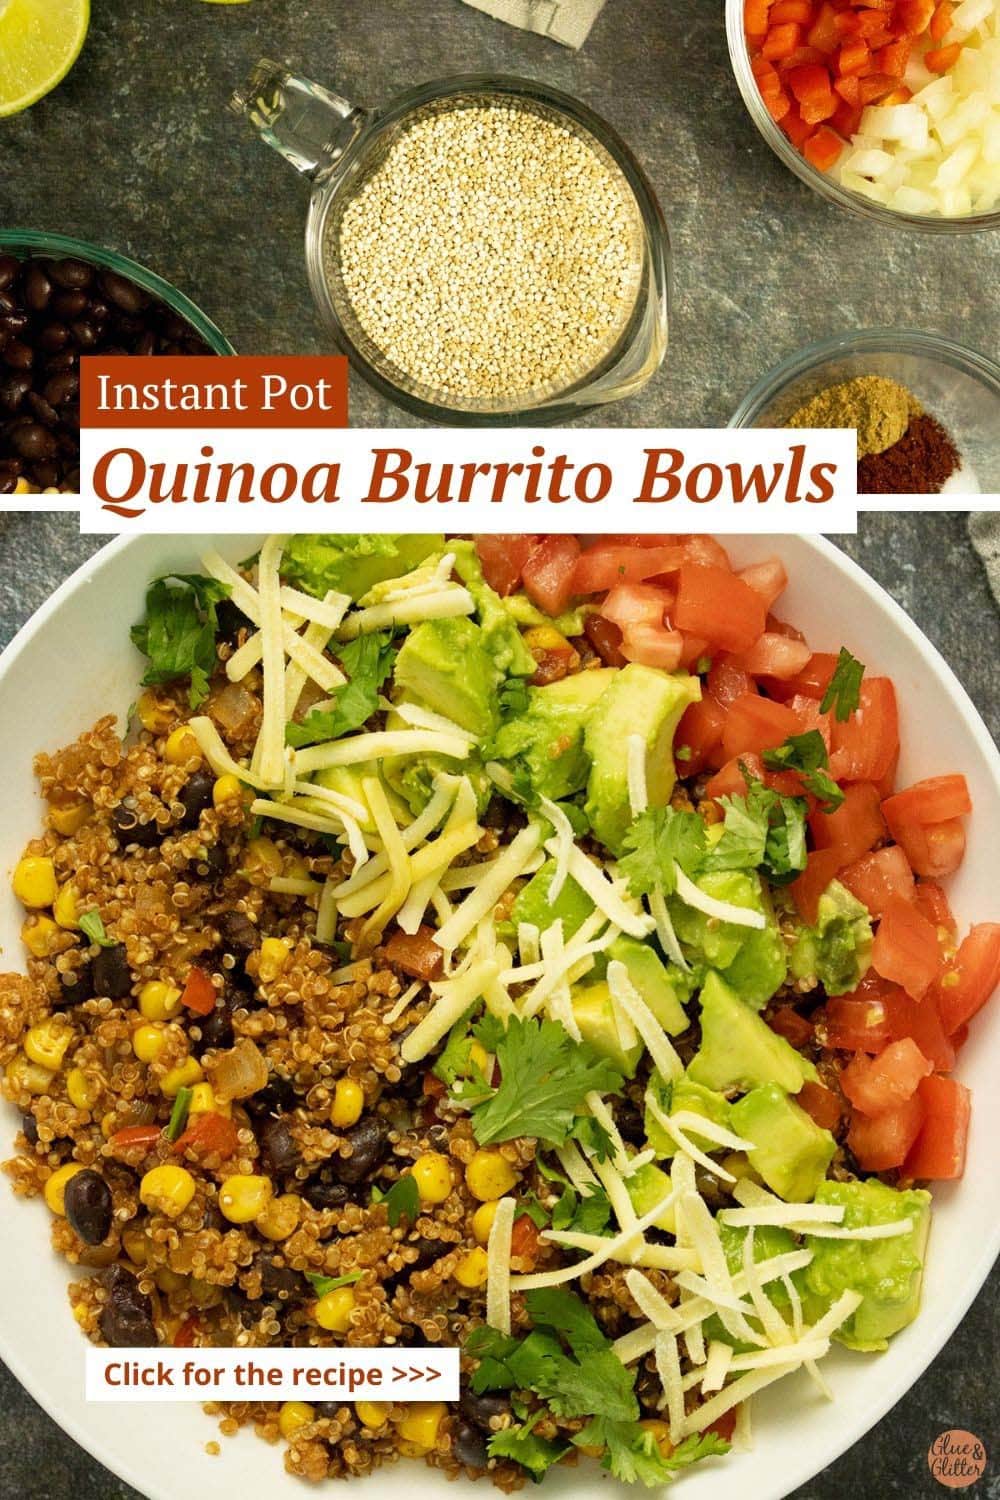 image collage of quinoa and other ingredients and the finished quinoa burrito bowl with beans, corn, and red peppers topped with avocado, tomato, cilantro, and vegan cheese shreds